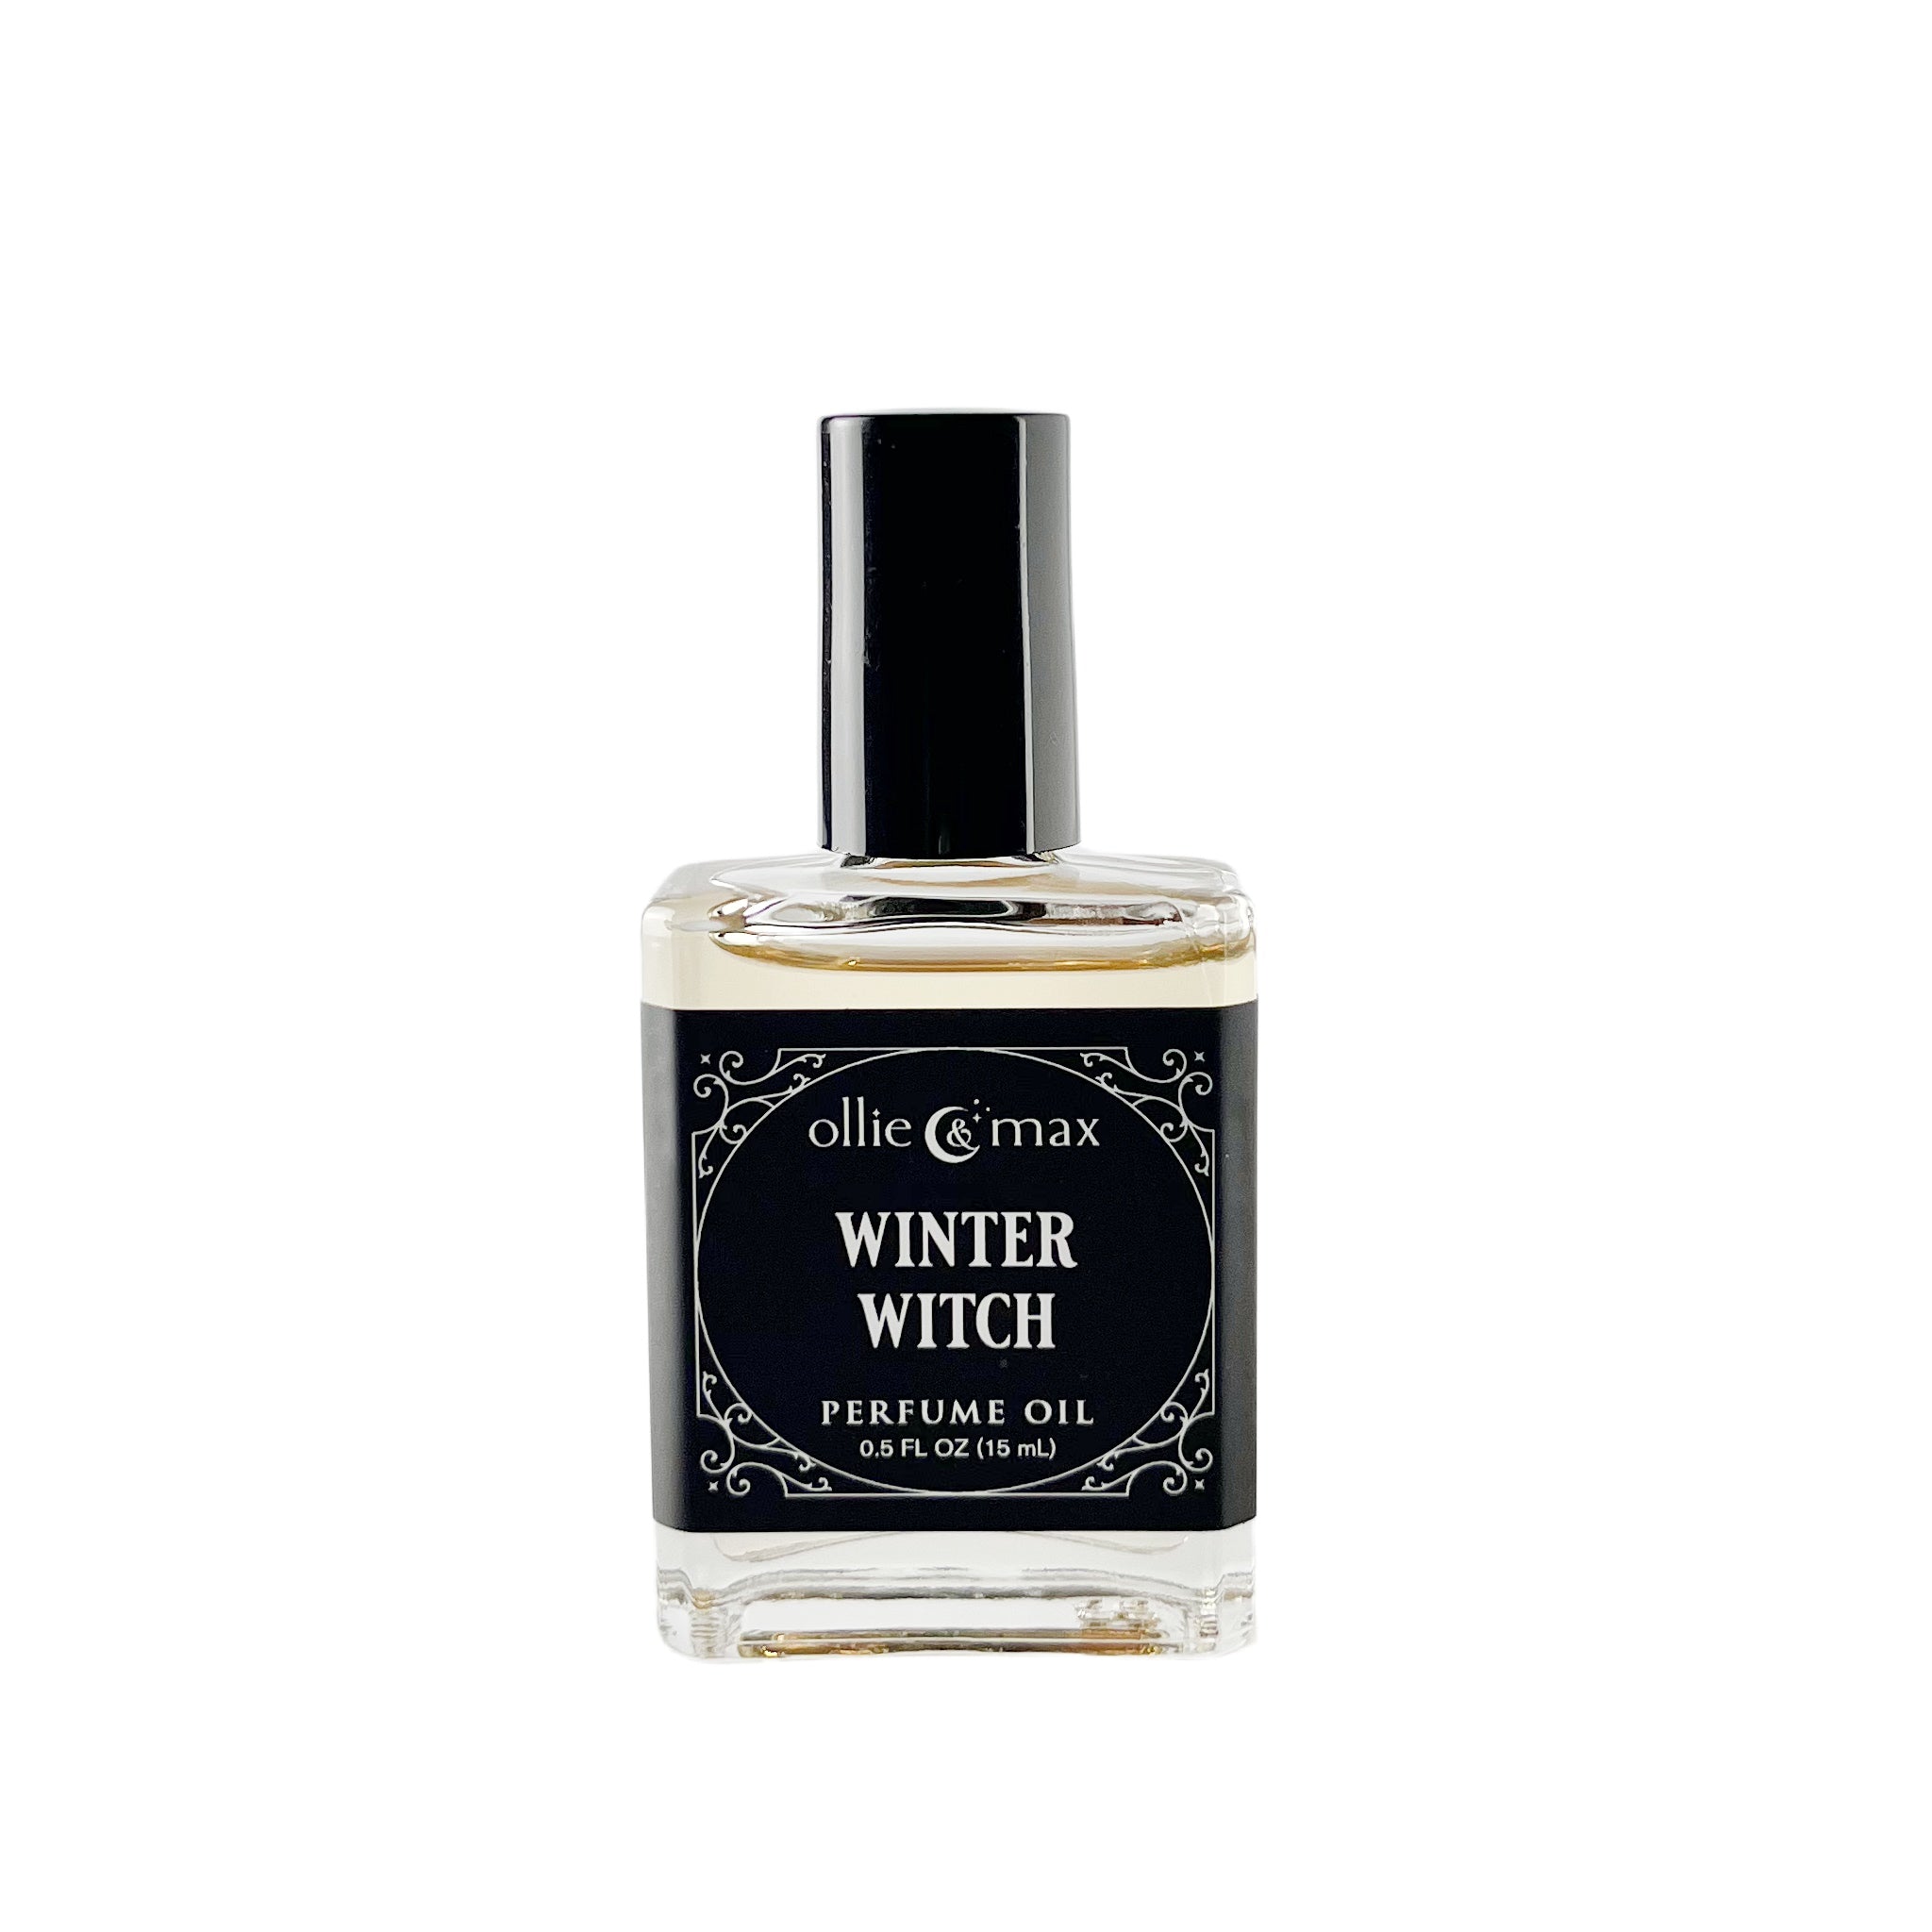 winter witch perfume in a rectangular glass bottle with black cap and black label, 15ml